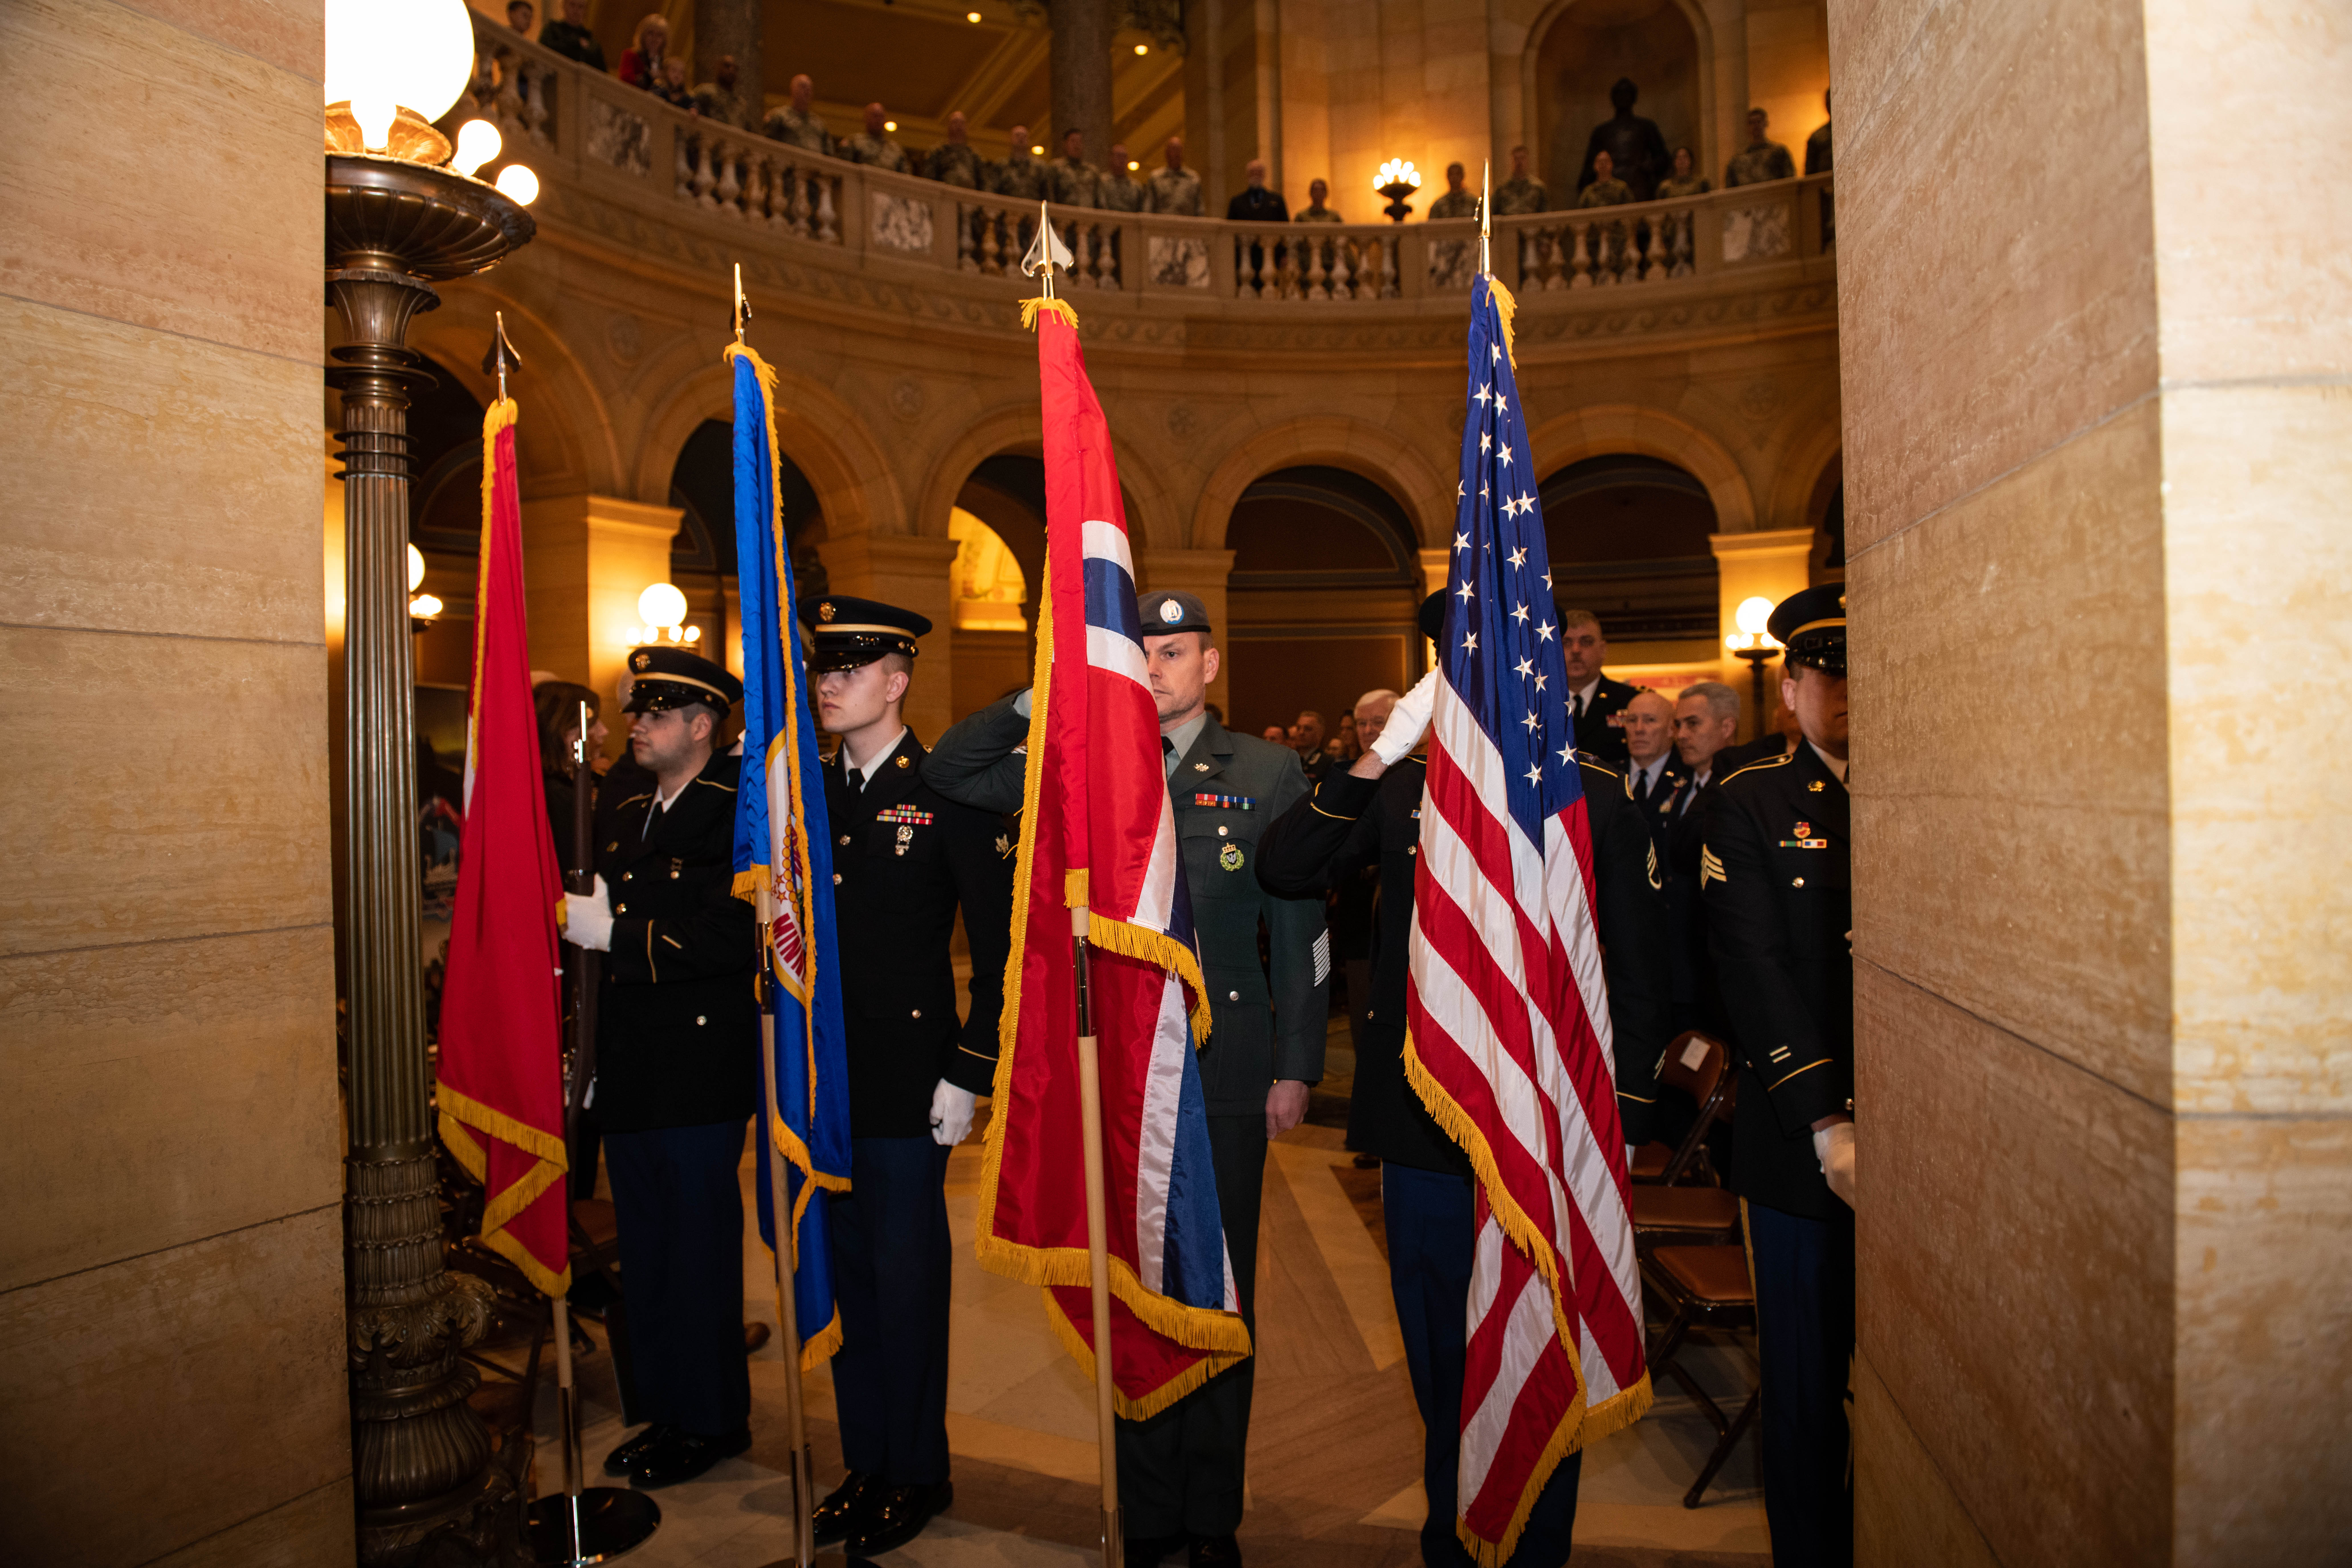 A joint color guard with members of the Minensota National Guard and the Norwegian Home Guard present the colors at the State Partnership Program Letter of Intent signing ceremony hosted by the Minnesota National Guard at the Minnesota State Capitol on Feb. 4, 2023, in St. Paul, Minnesota. The official State Partnership Program signing ceremony is scheduled for Feb.15 in Trondheim, Norway.  



The Department of Defense’s State Partnership Program pairs the National Guard of a U.S. state or territory with a partner nation’s military, security forces, and government agencies responsible for emergency response and disaster response and began in 1993 with 13 partners.  



The Minnesota Guard has shared a partnership with Croatia for 27 years, and Norway will become another partner through this program. (Minnesota National Guard photo by Staff Sgt. Luther Talks)